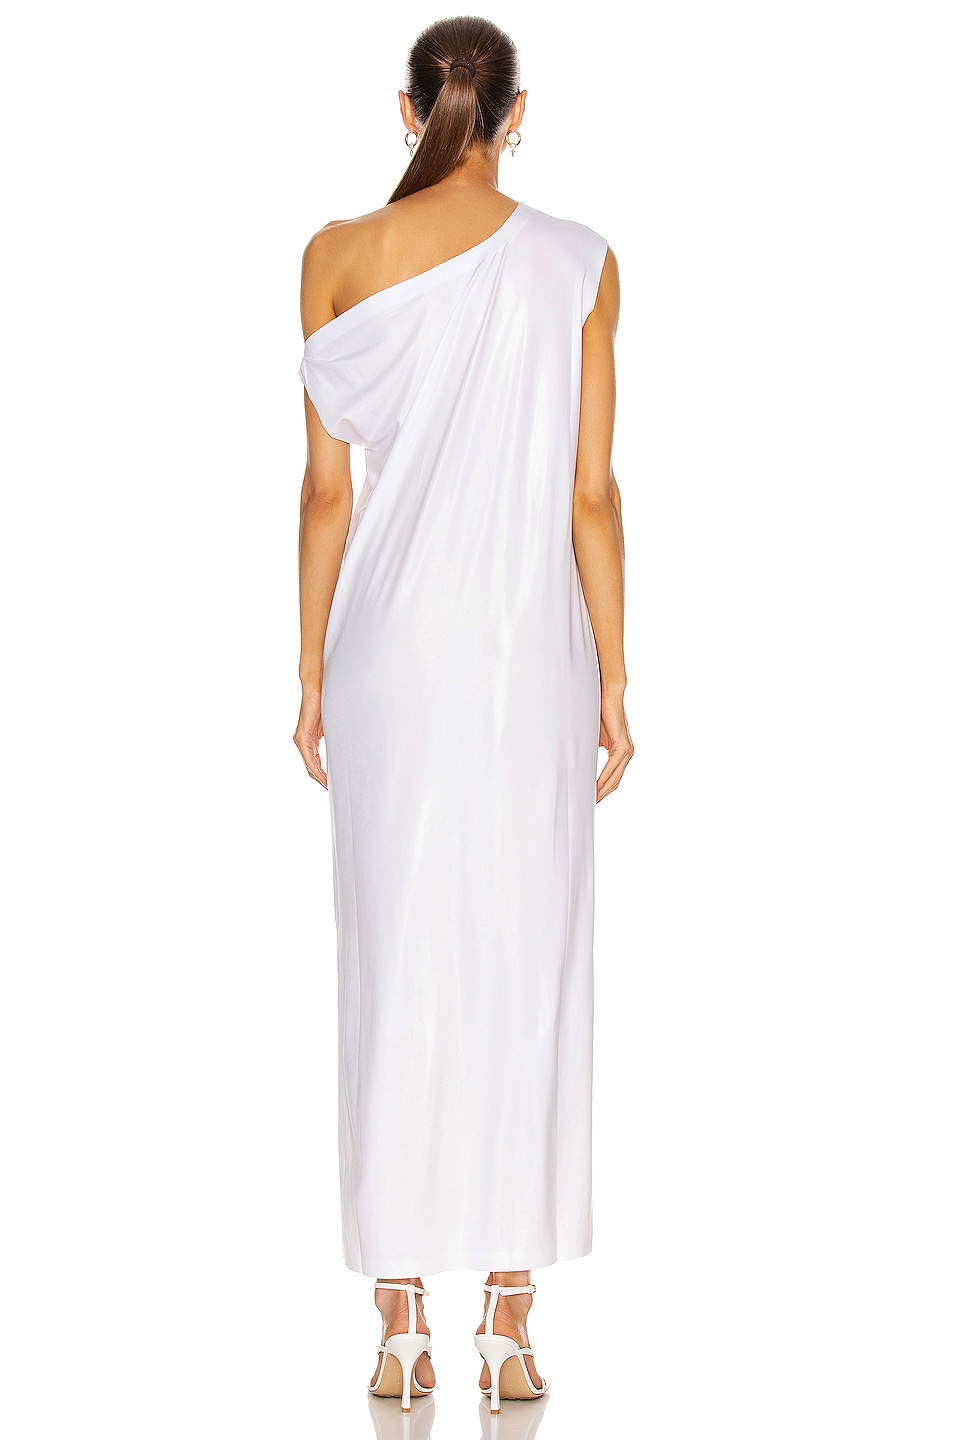 Norma Kamali Drop Shoulder Gown in White | FWRD